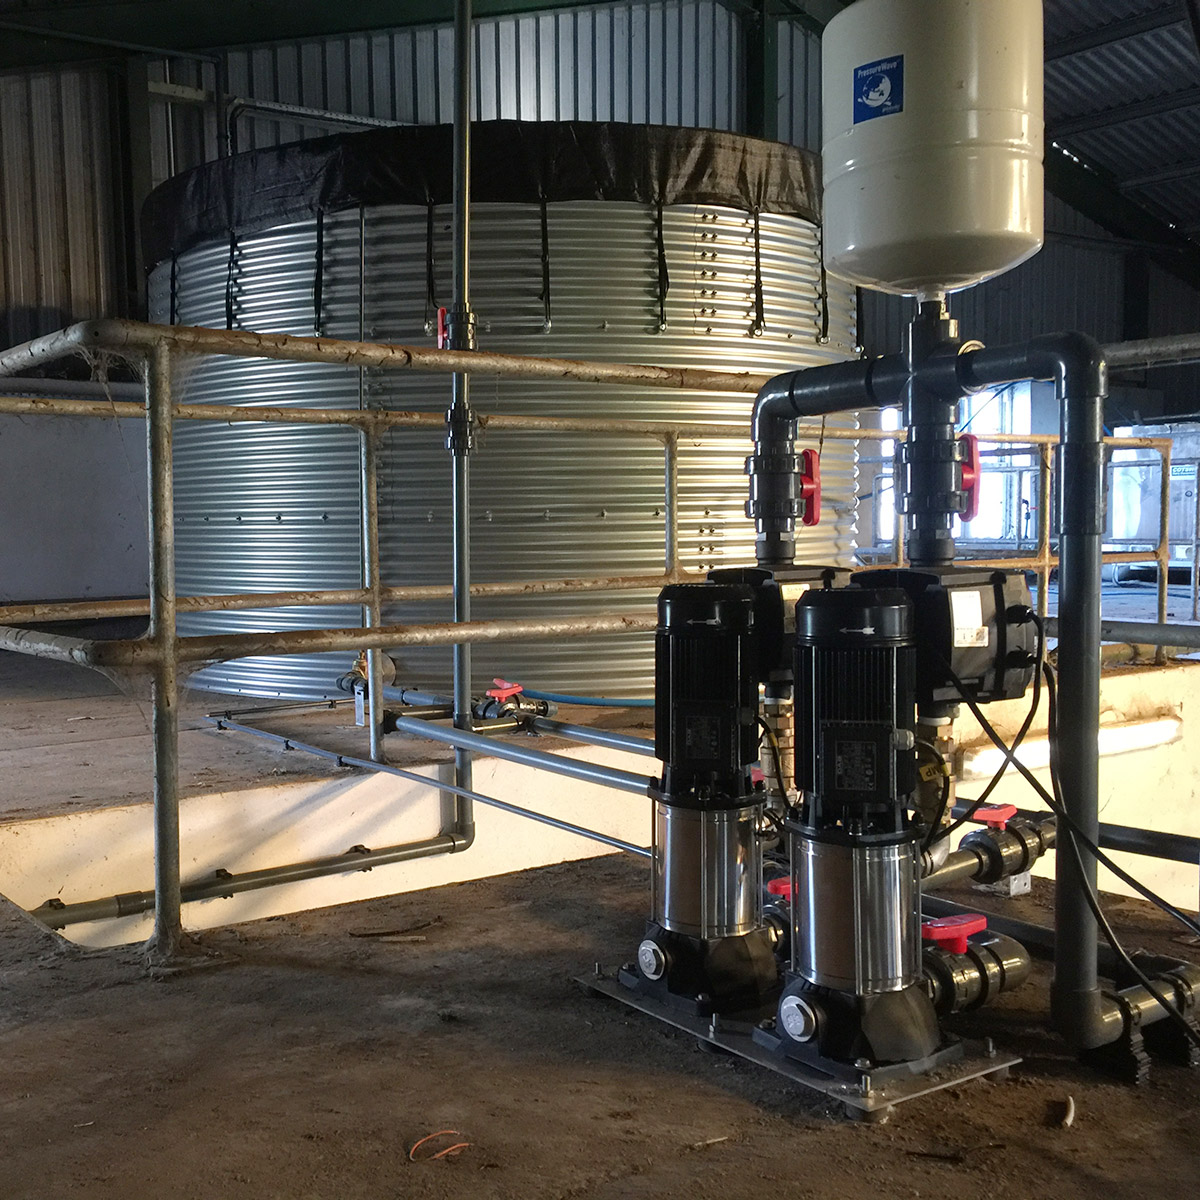 Booster pumps in milking parlour